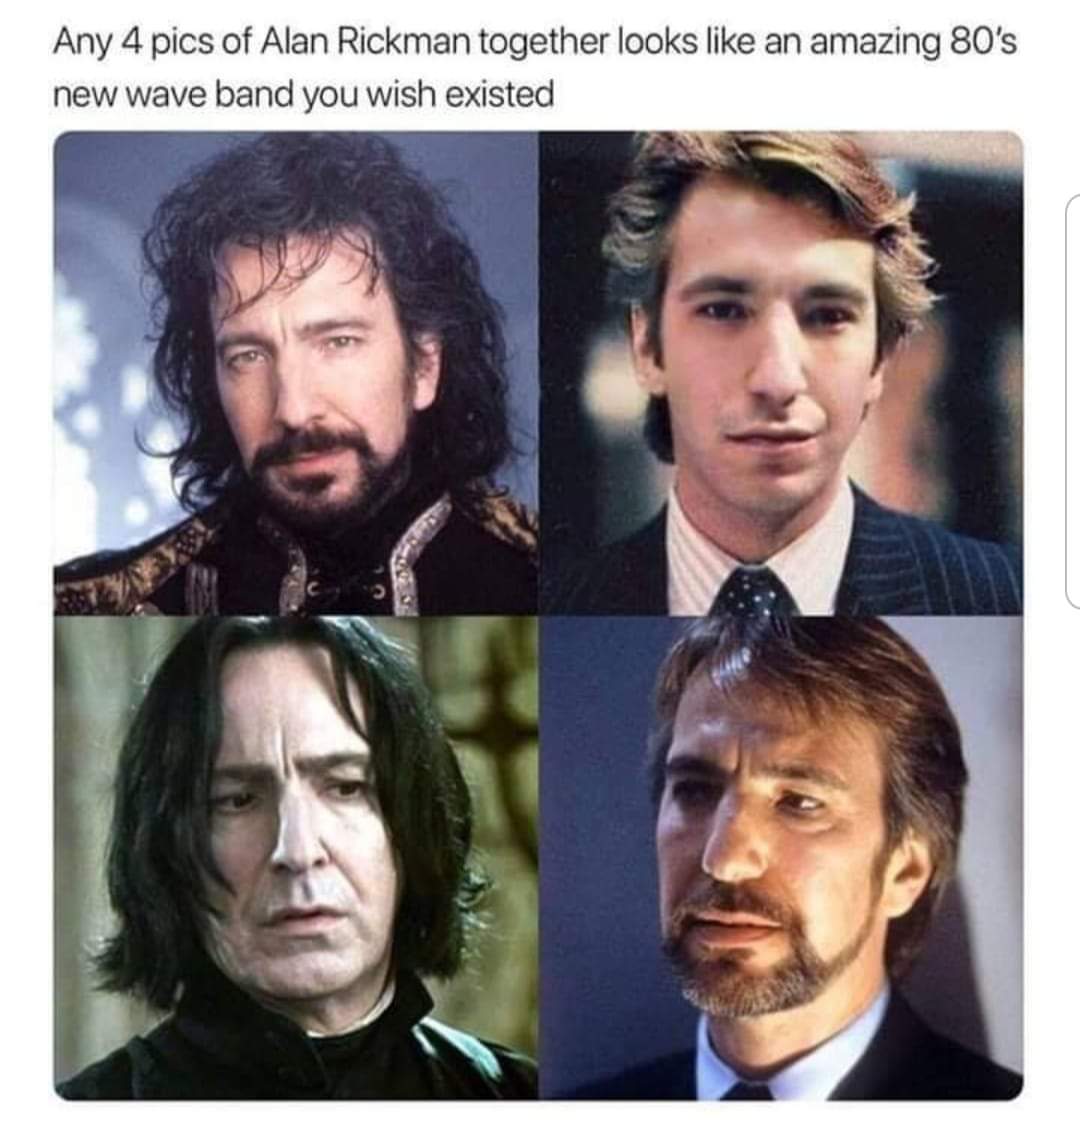 alan rickman band memes - Any 4 pics of Alan Rickman together looks an amazing 80's new wave band you wish existed